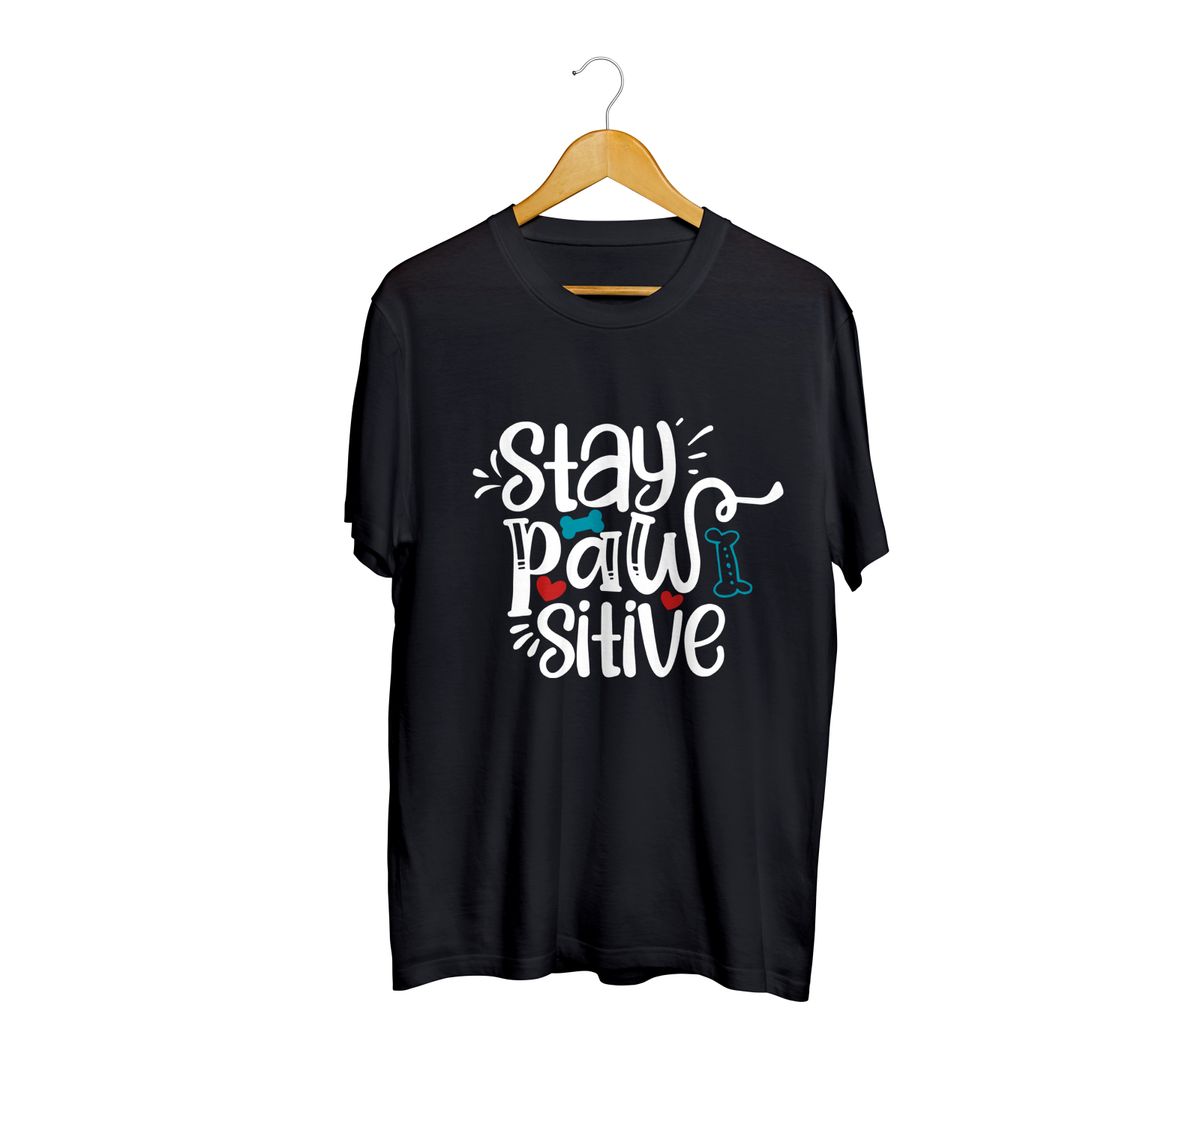 We Love Dogs Hub Black Exclusive T-Shirt image 1